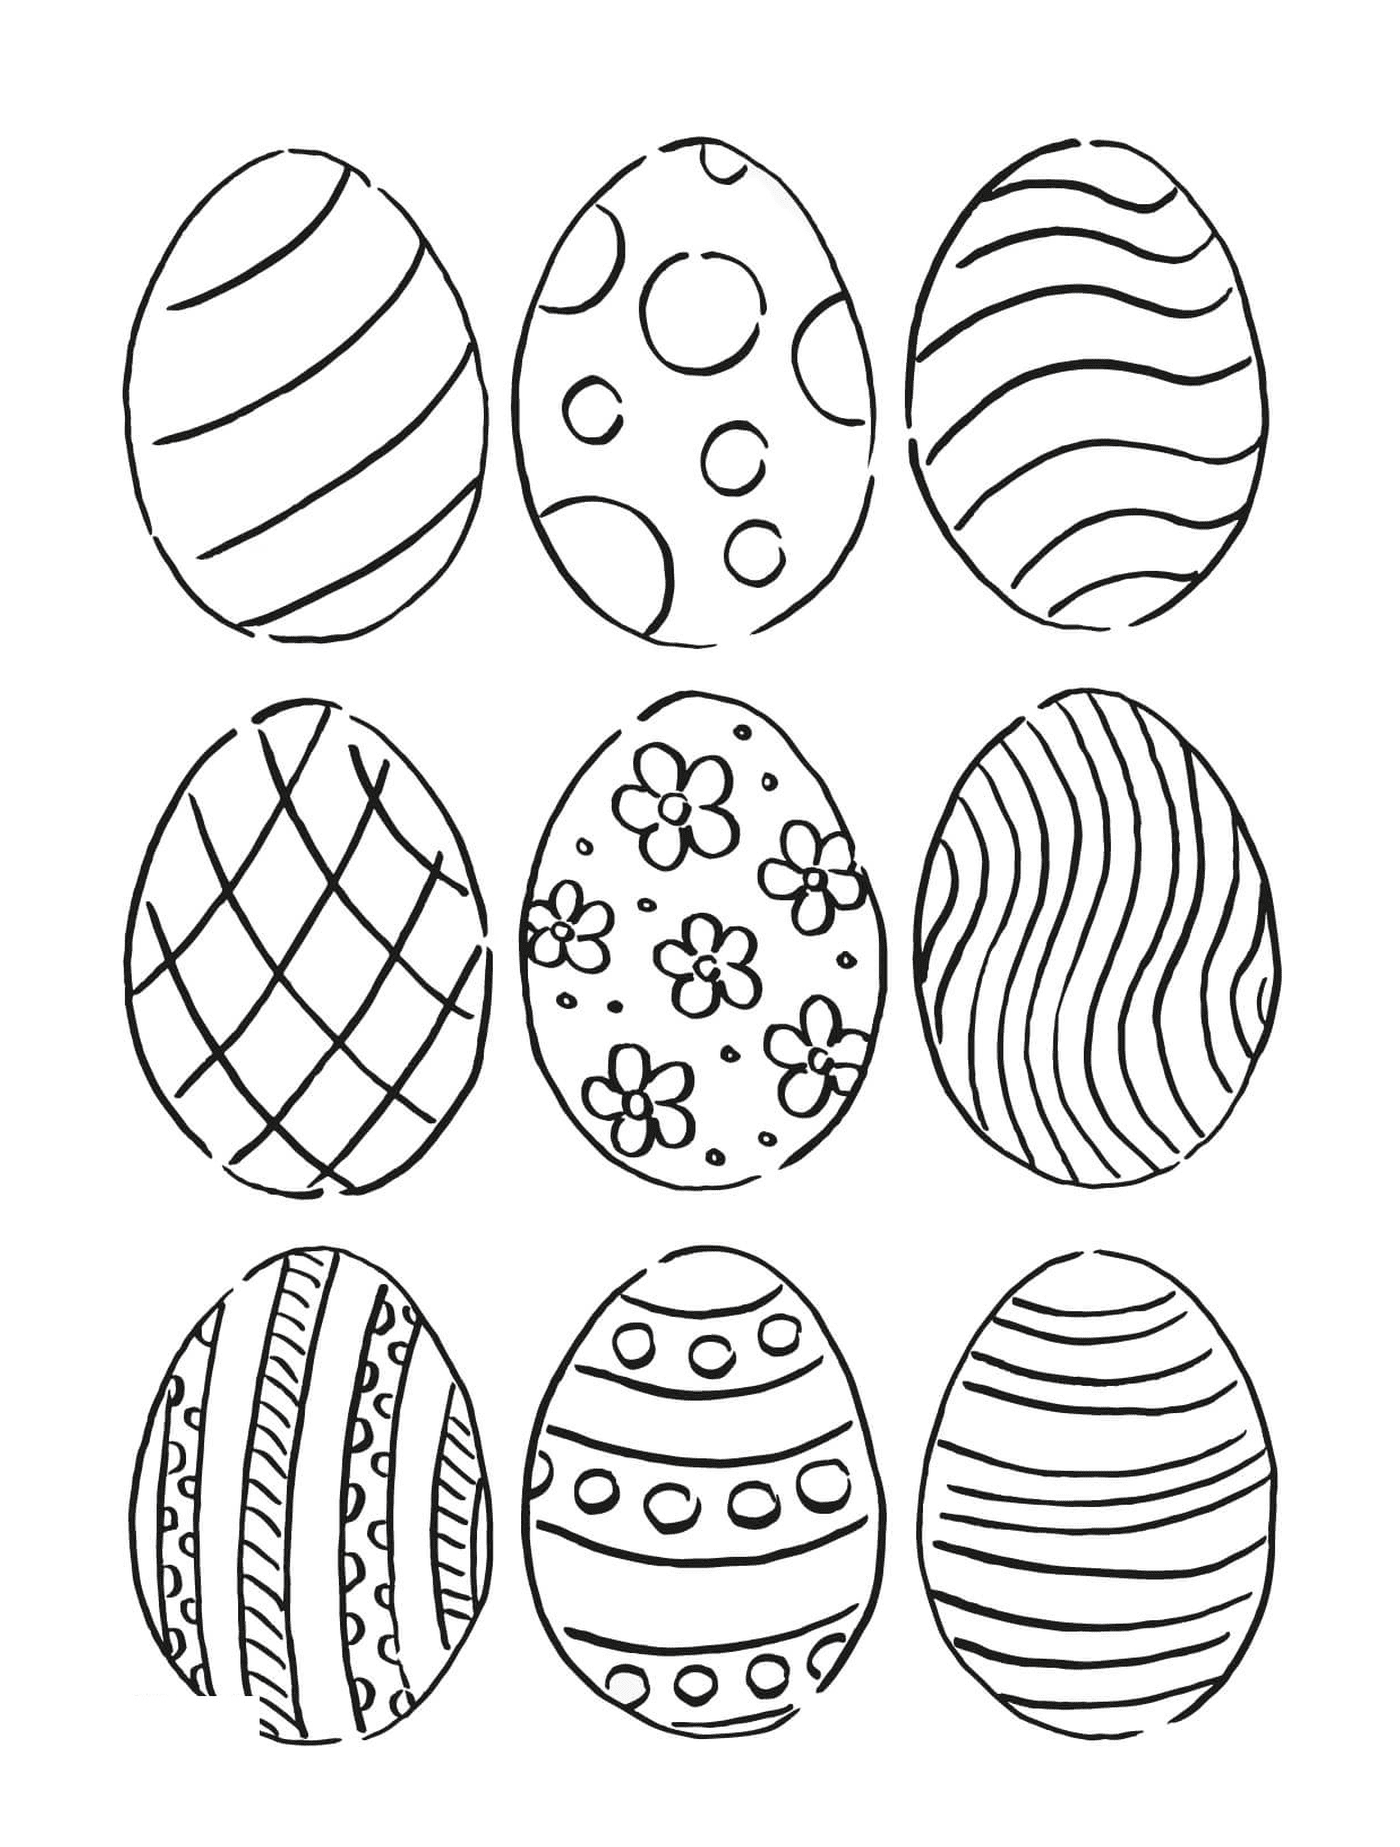  Set of nine eggs with different patterns 